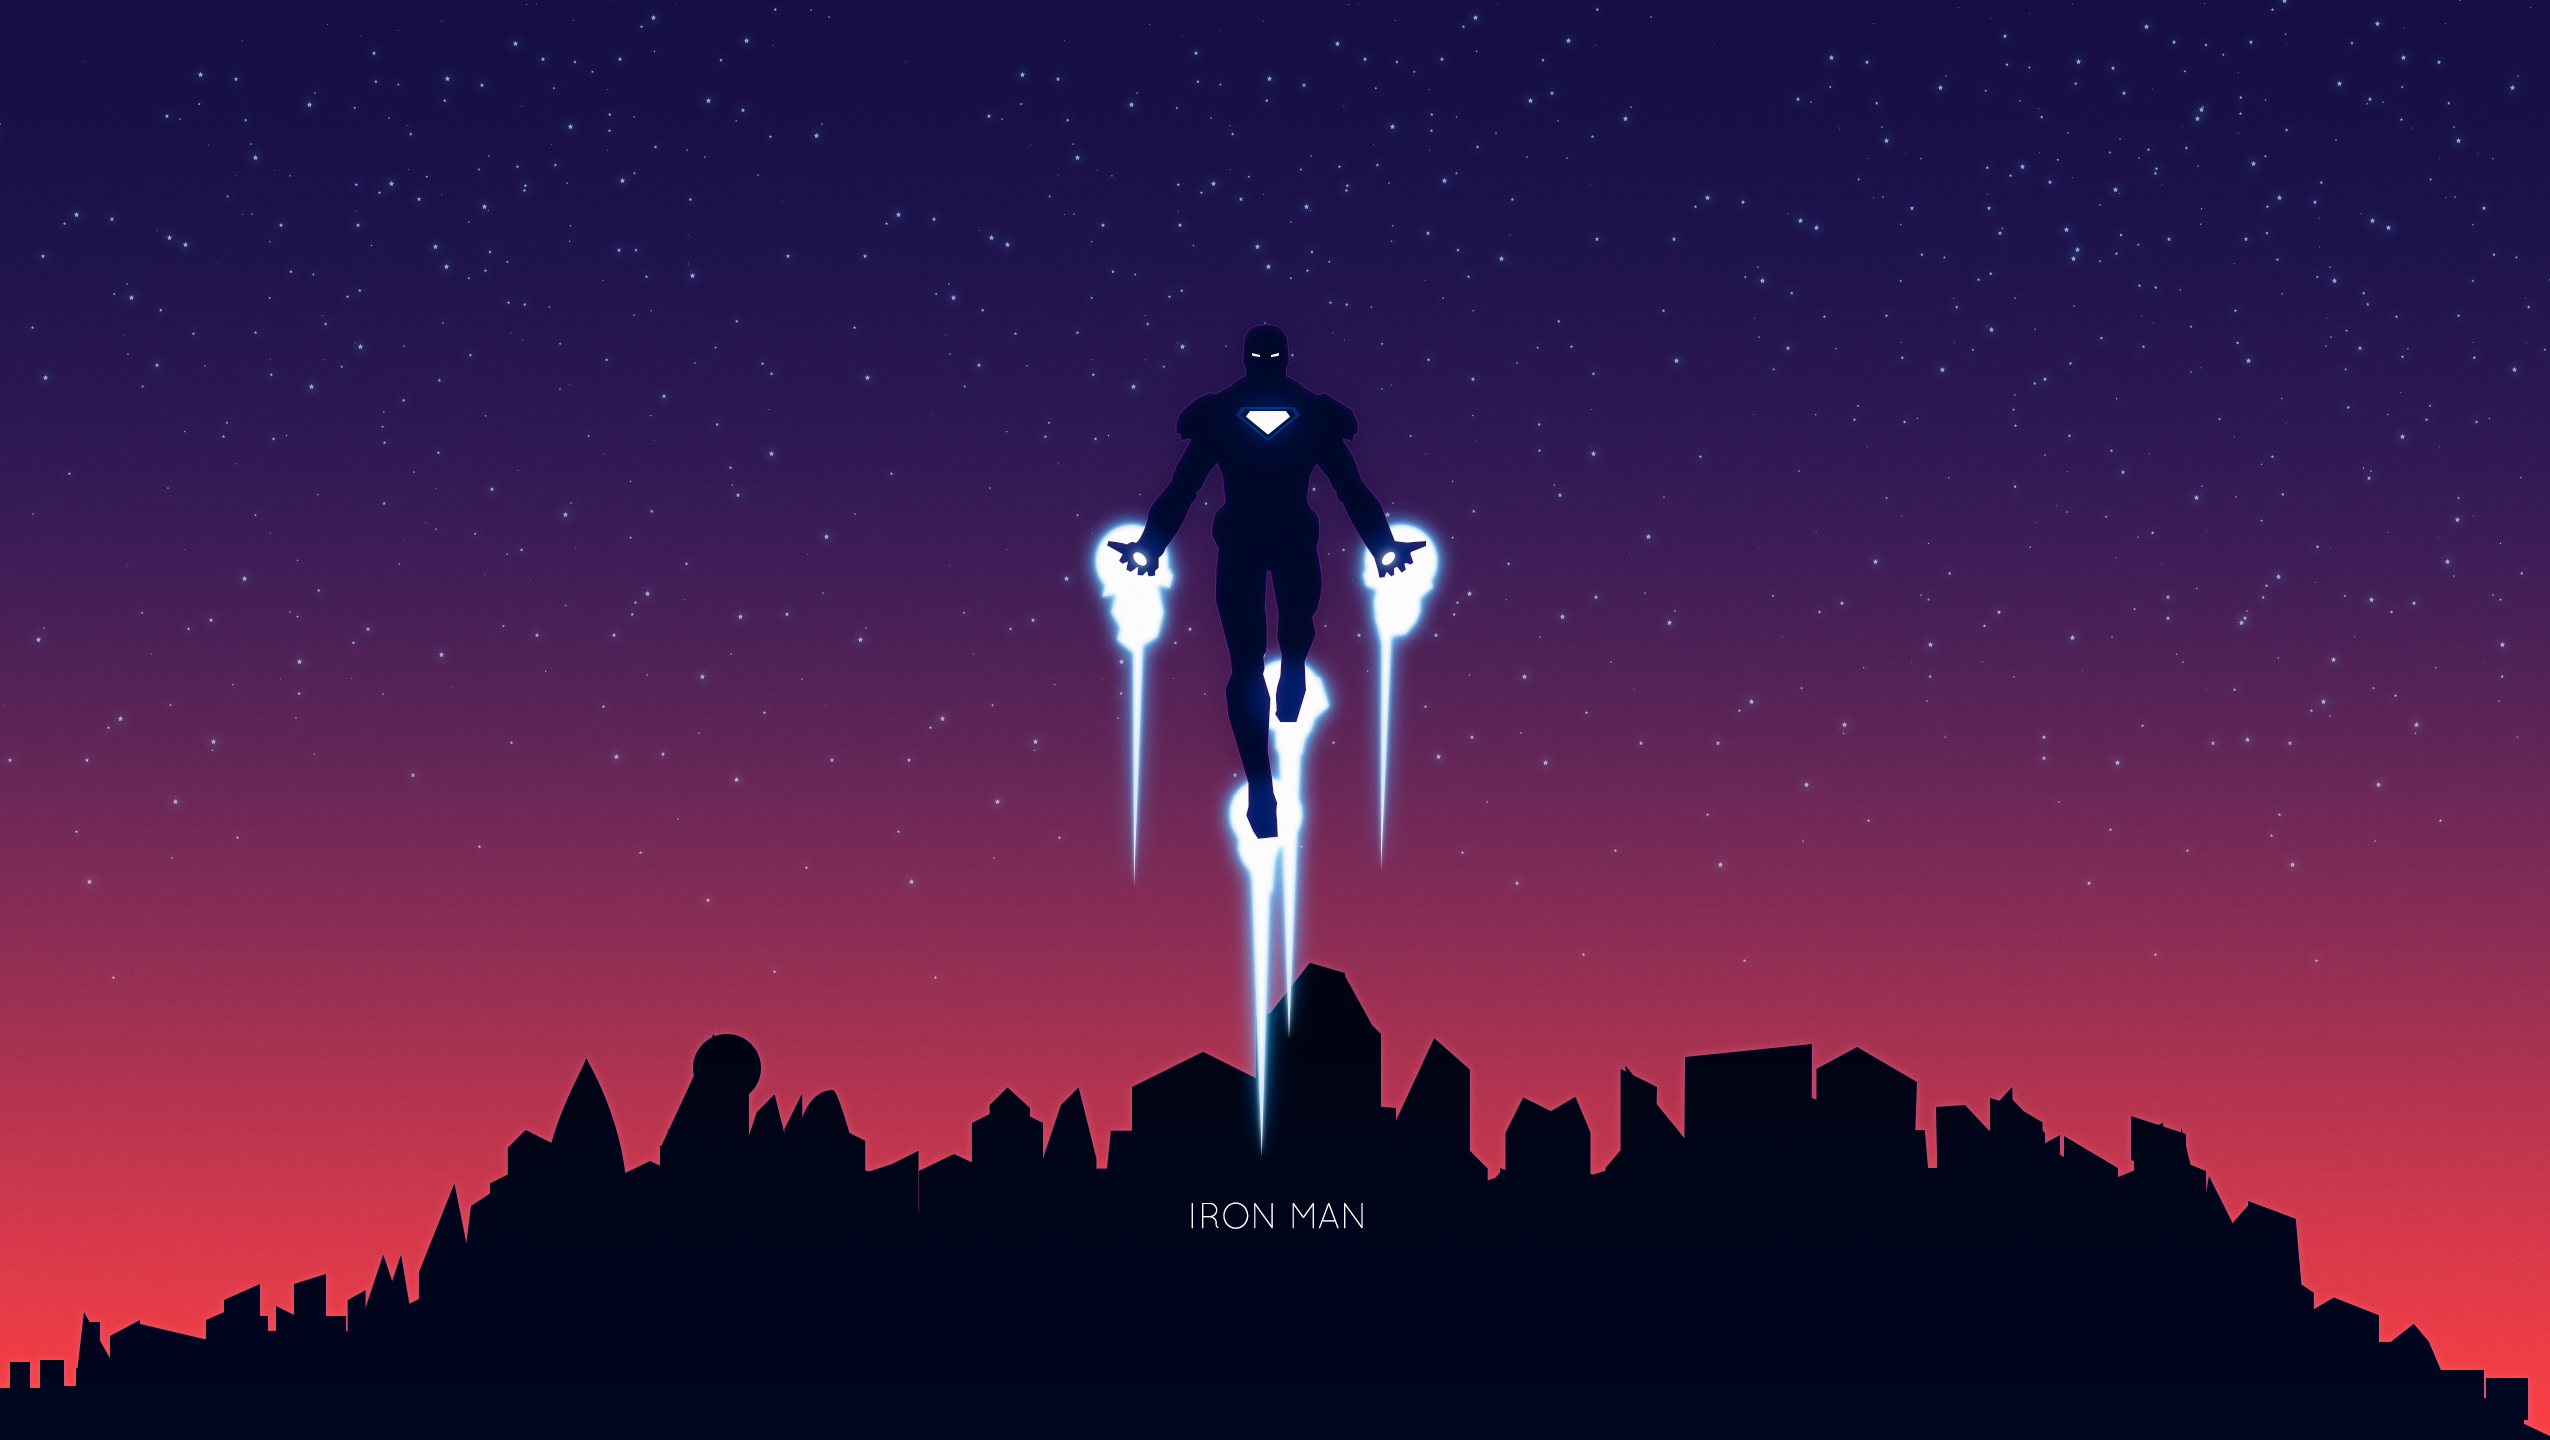 Ironman Images High Definition 2550x1440 px